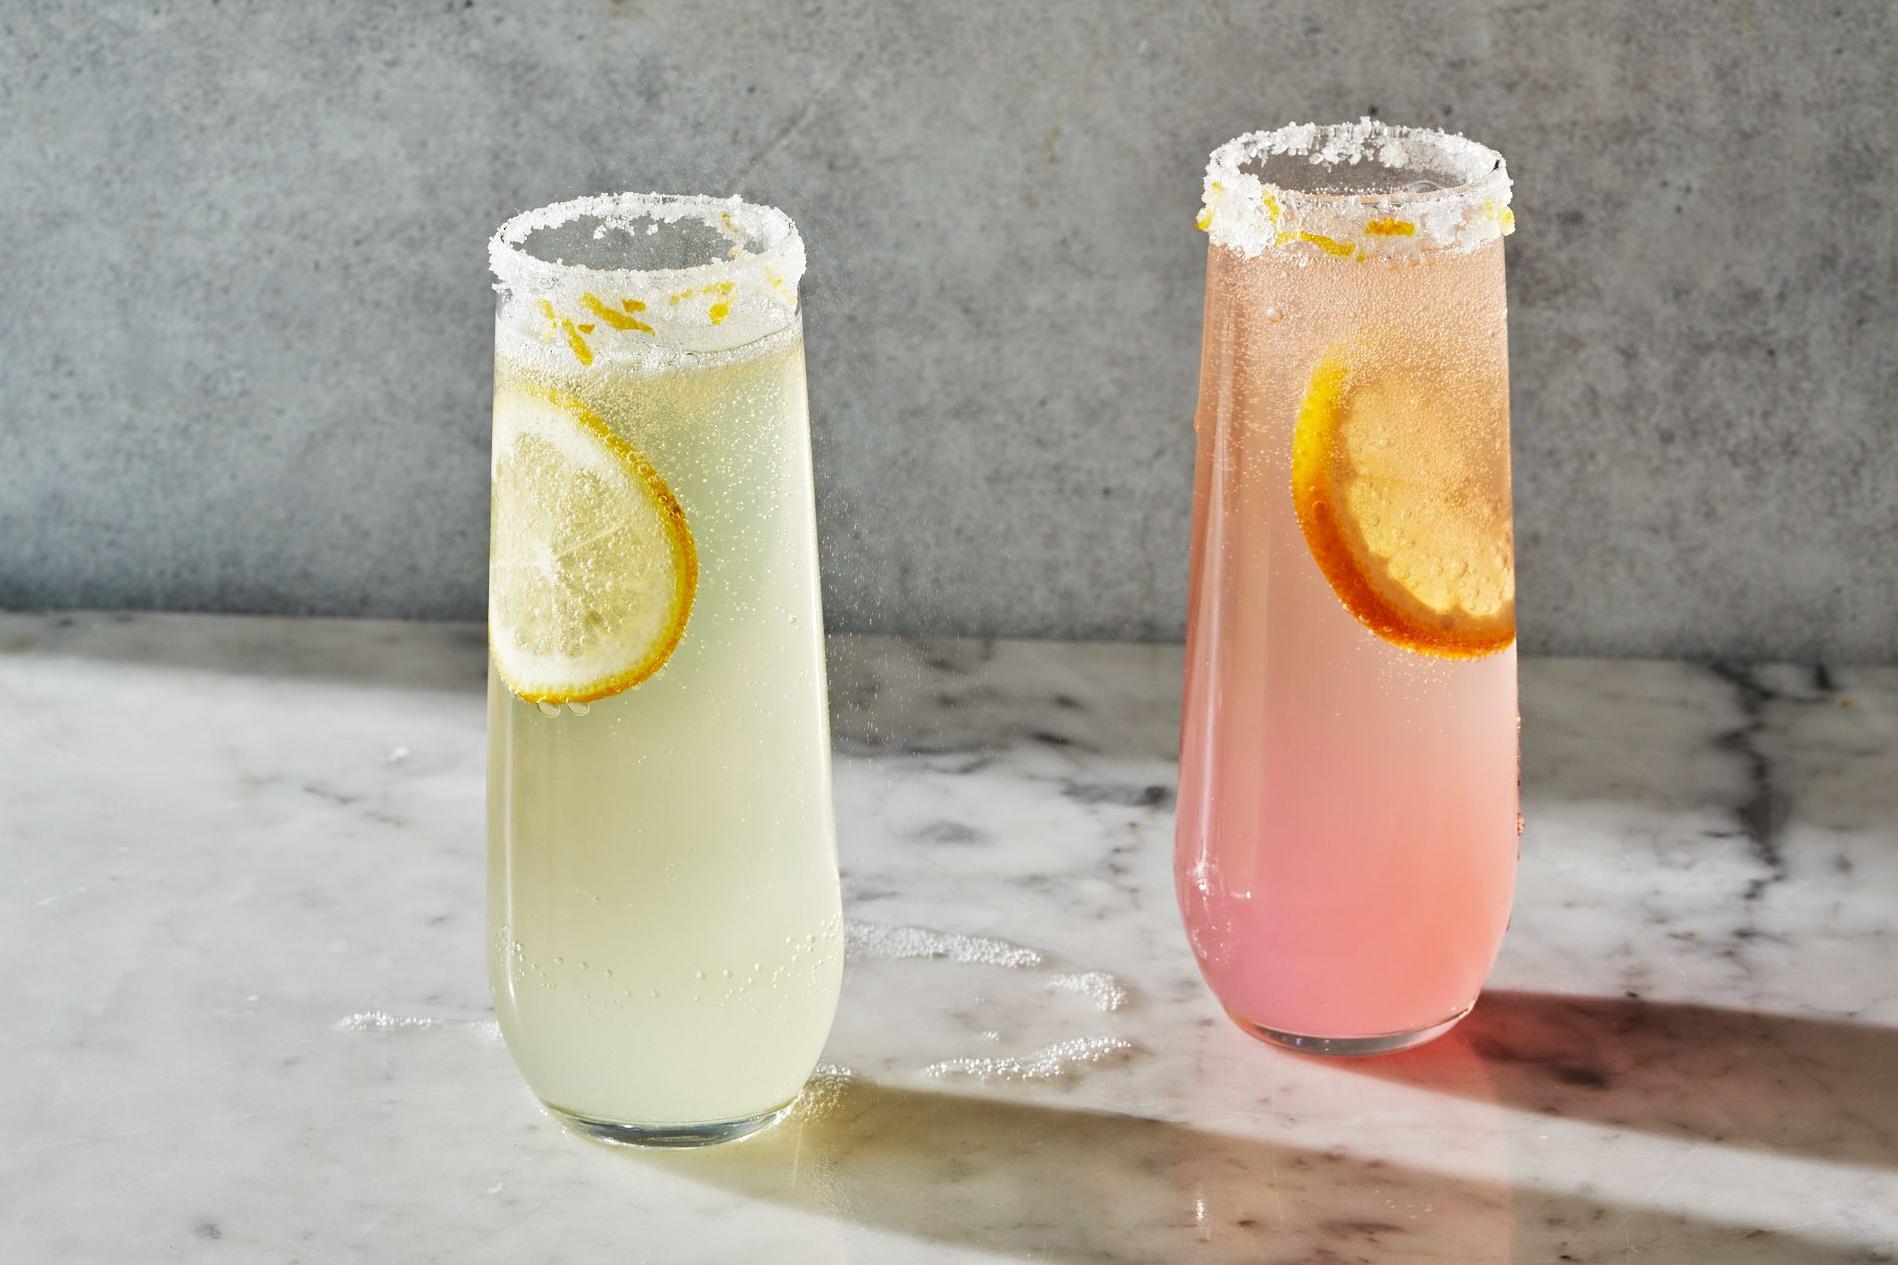  Celebrate life's little moments with a glass of Champagne Lemonade.